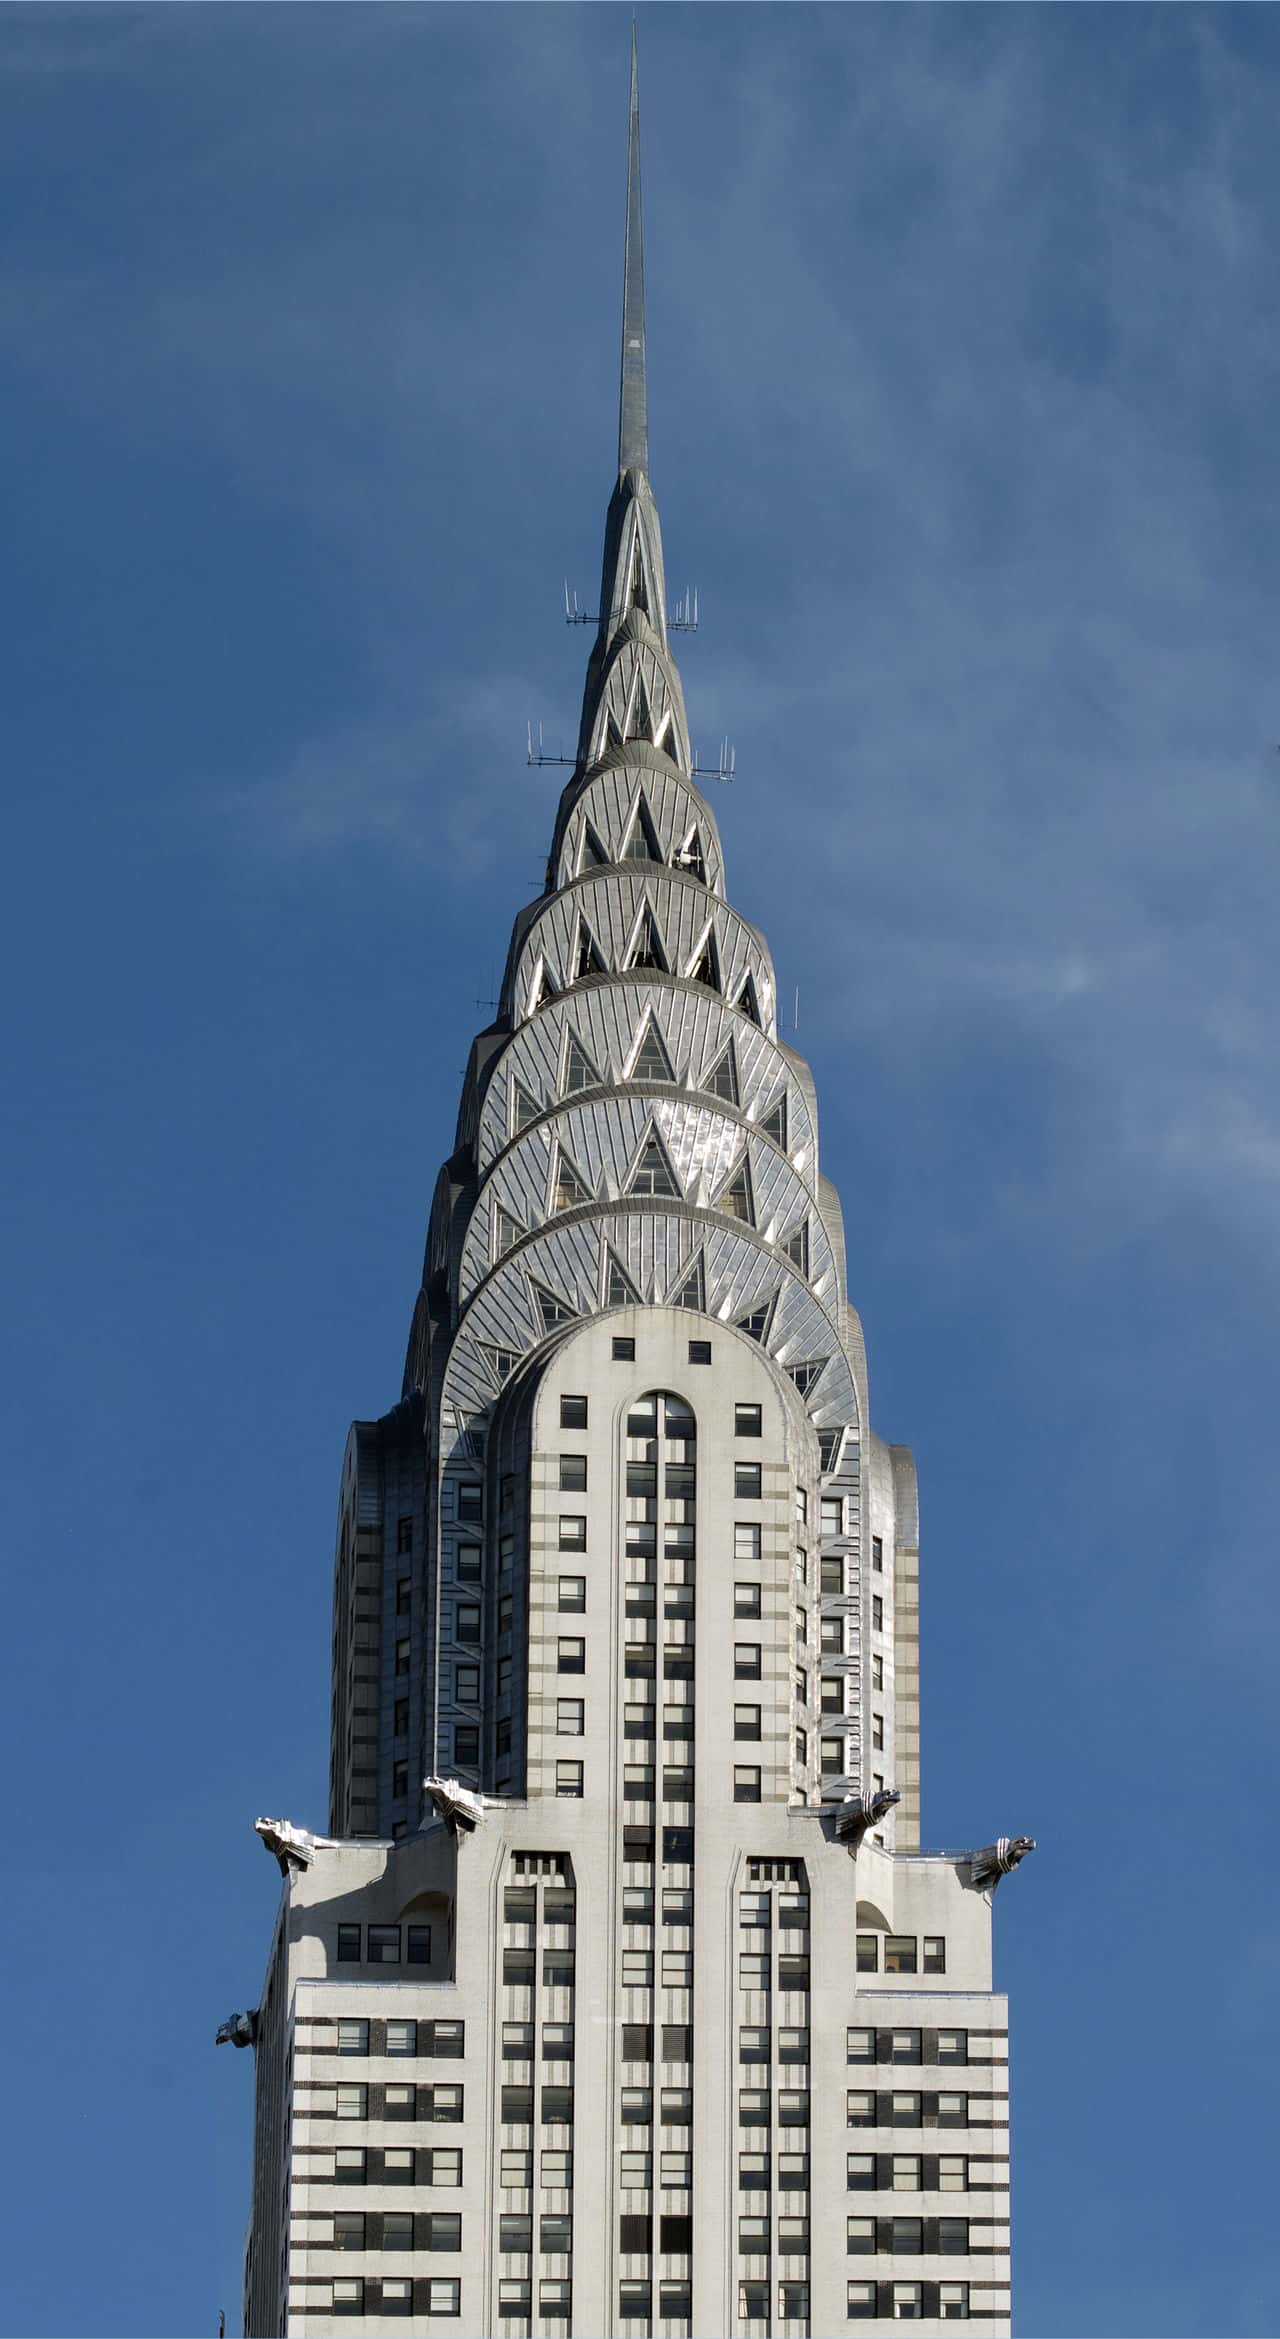 Chrysler building art deco styled crown and spire © carol m. Highsmith